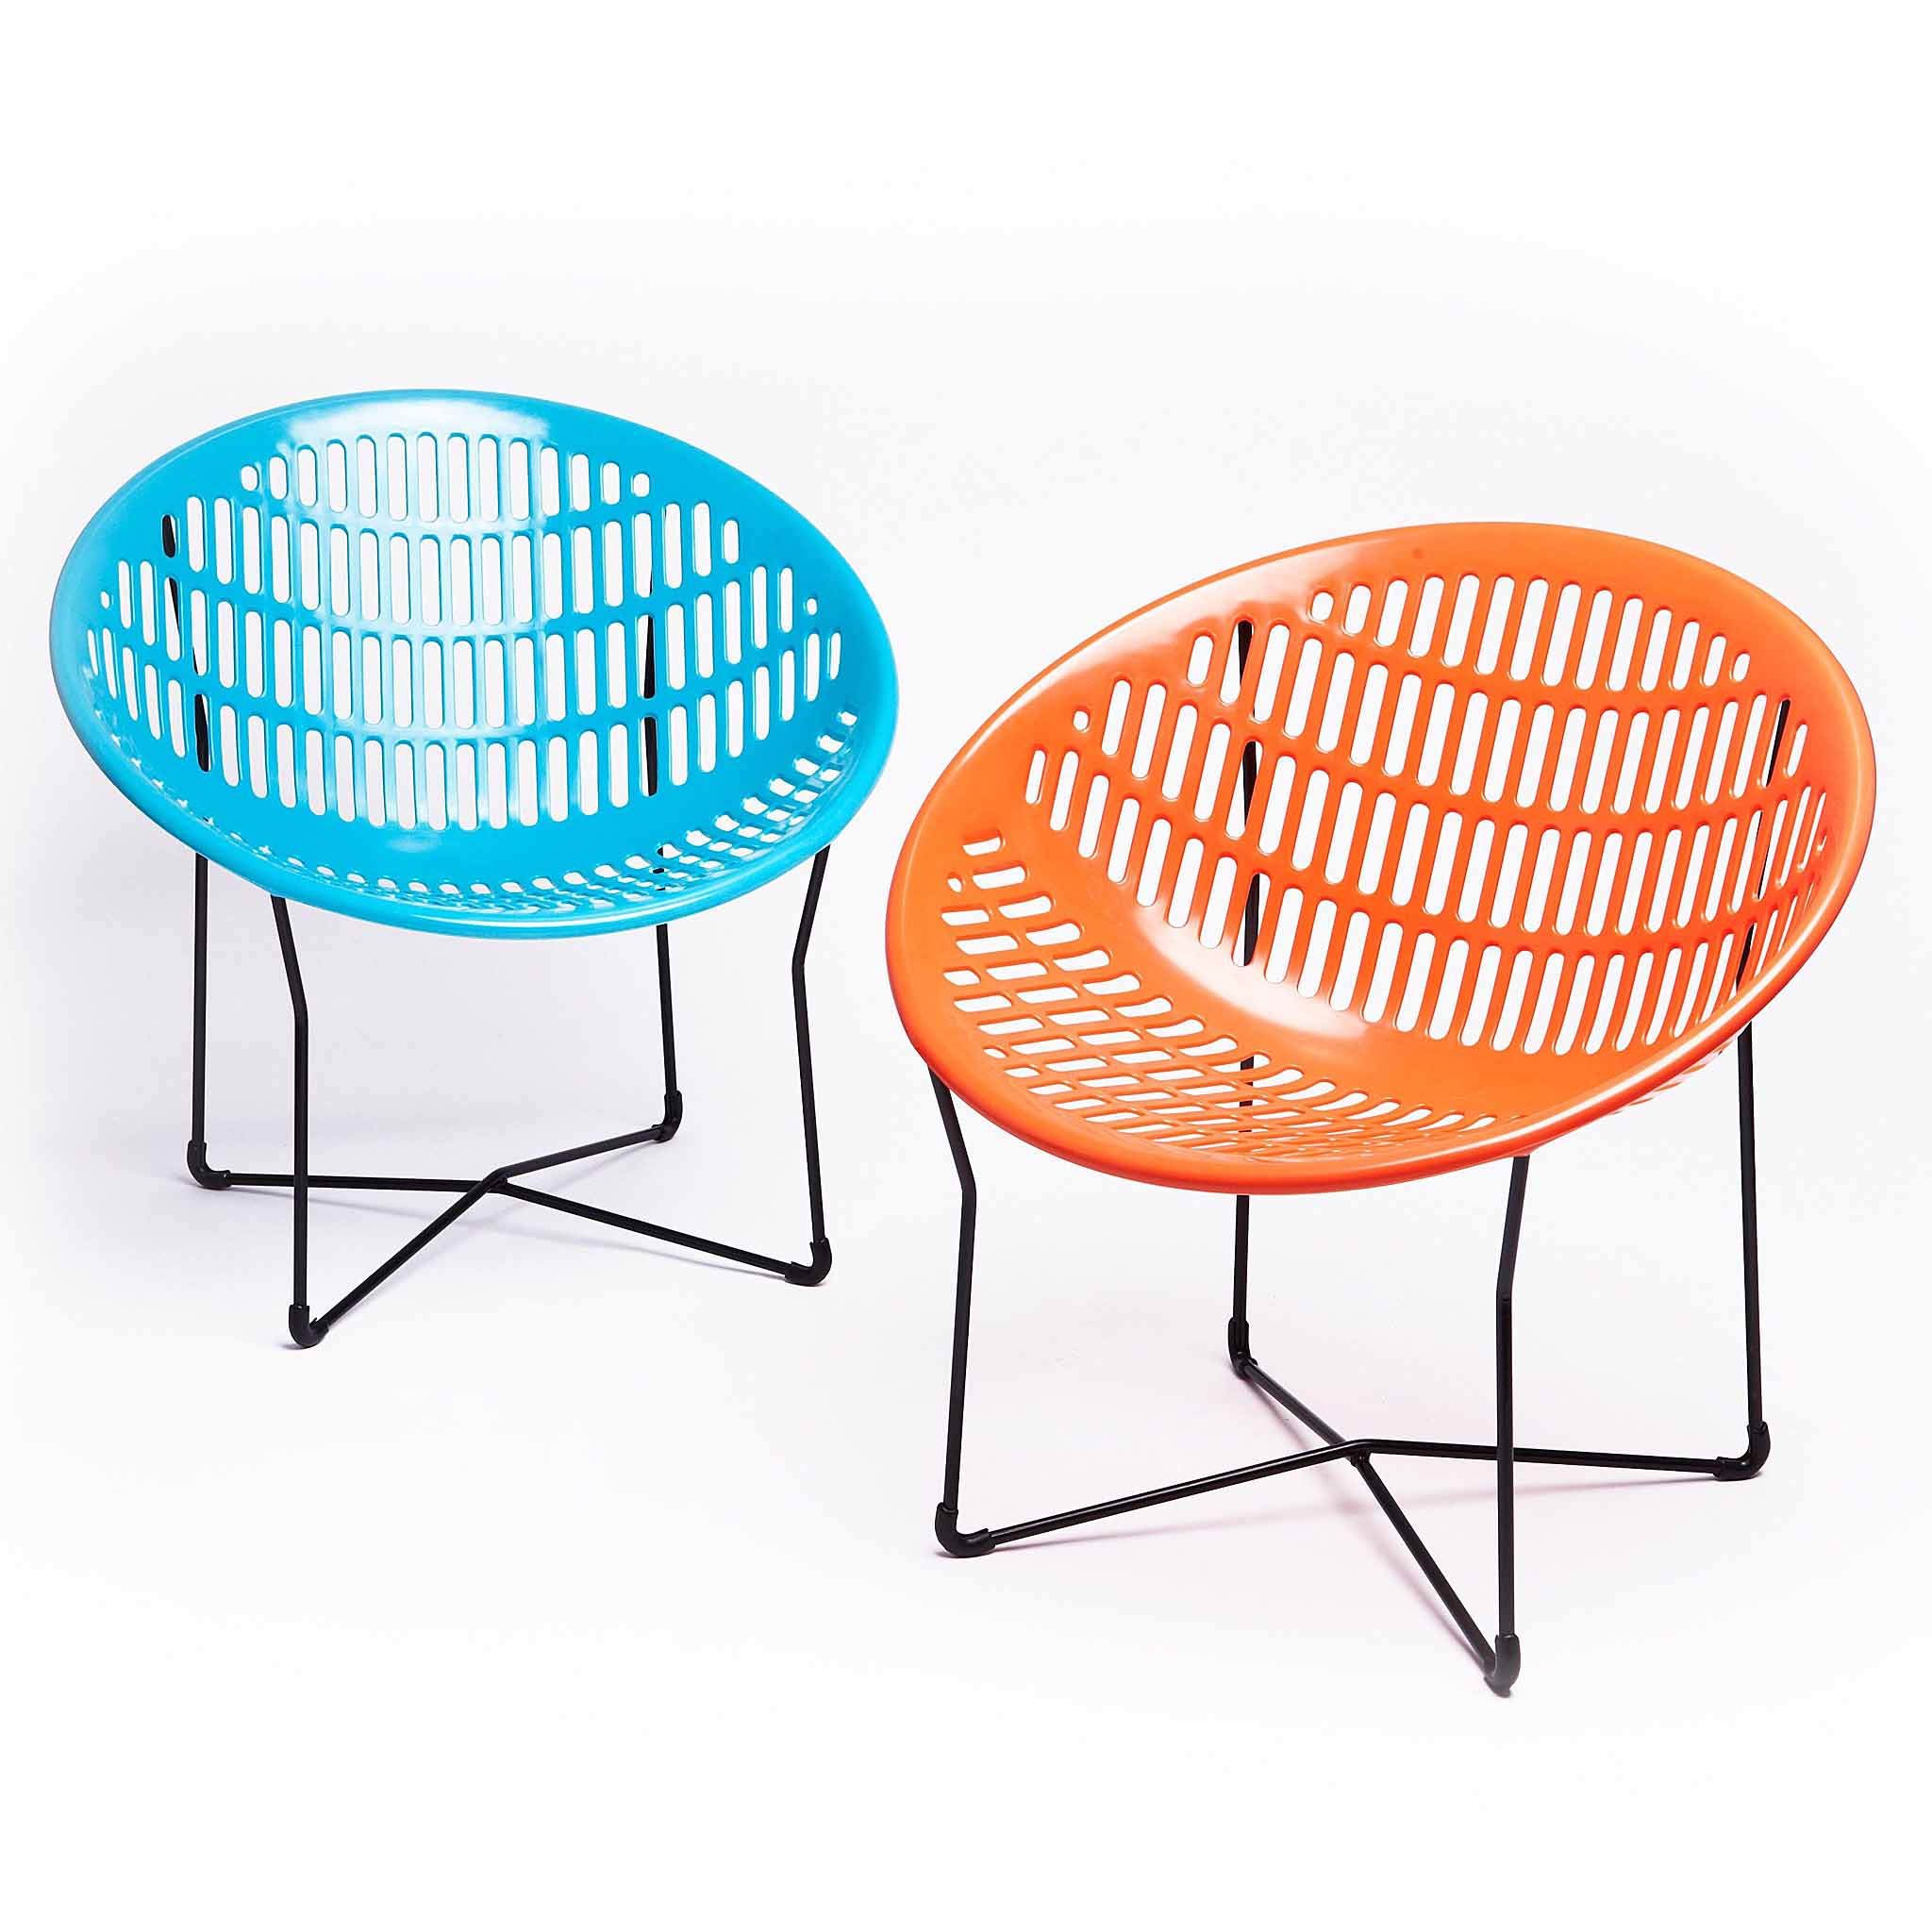 Solair chairs by IEL-LaChance